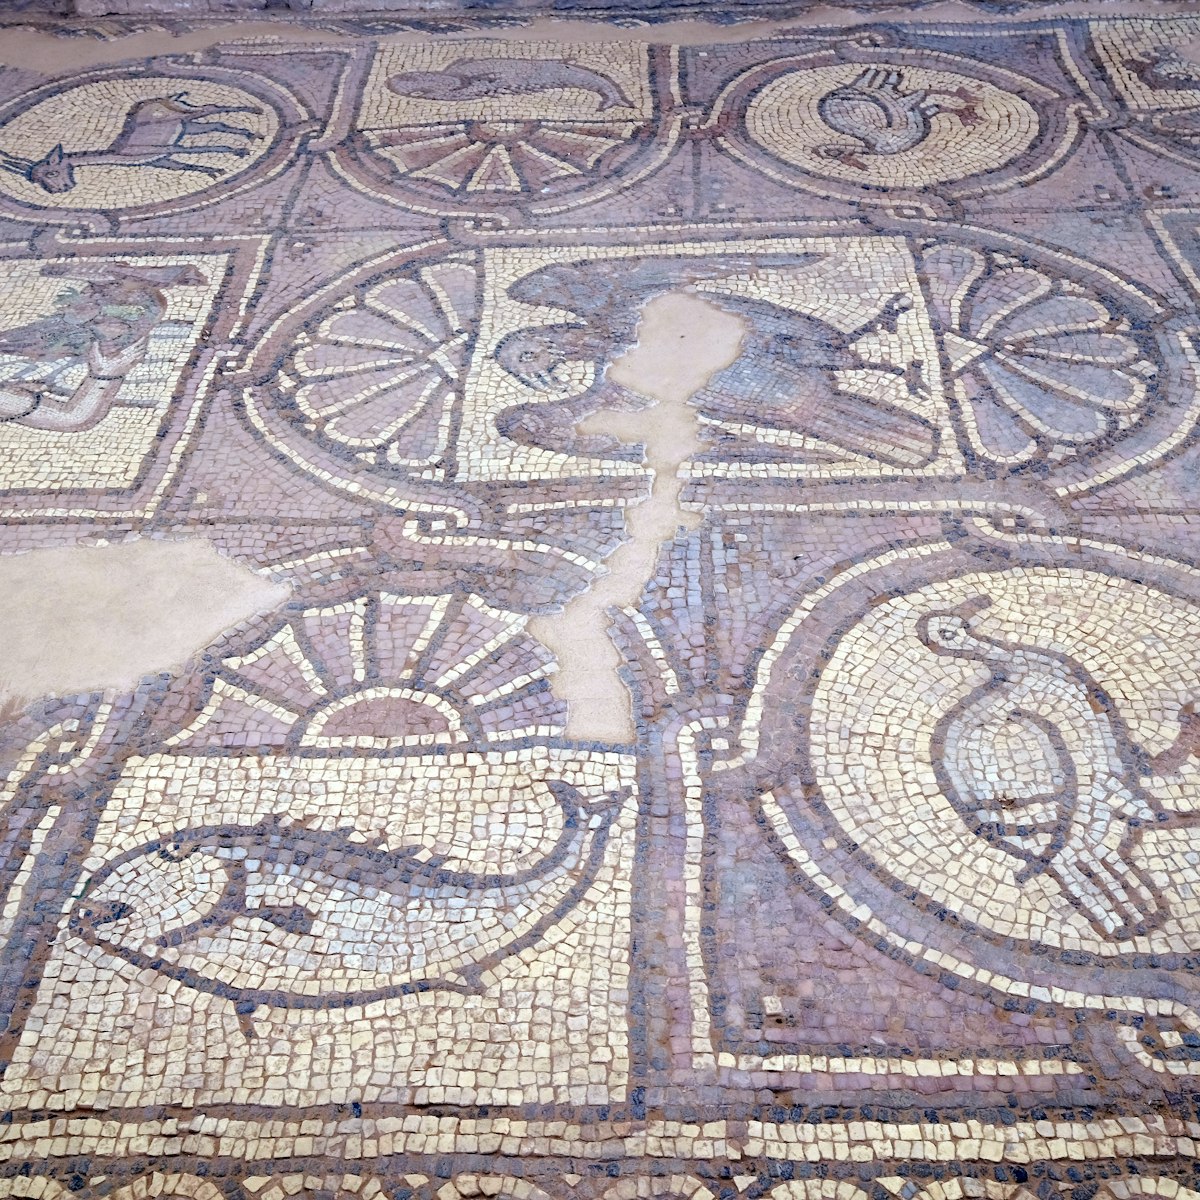 Floor mosaics of Petra Church, also known as the Byzantine Church.